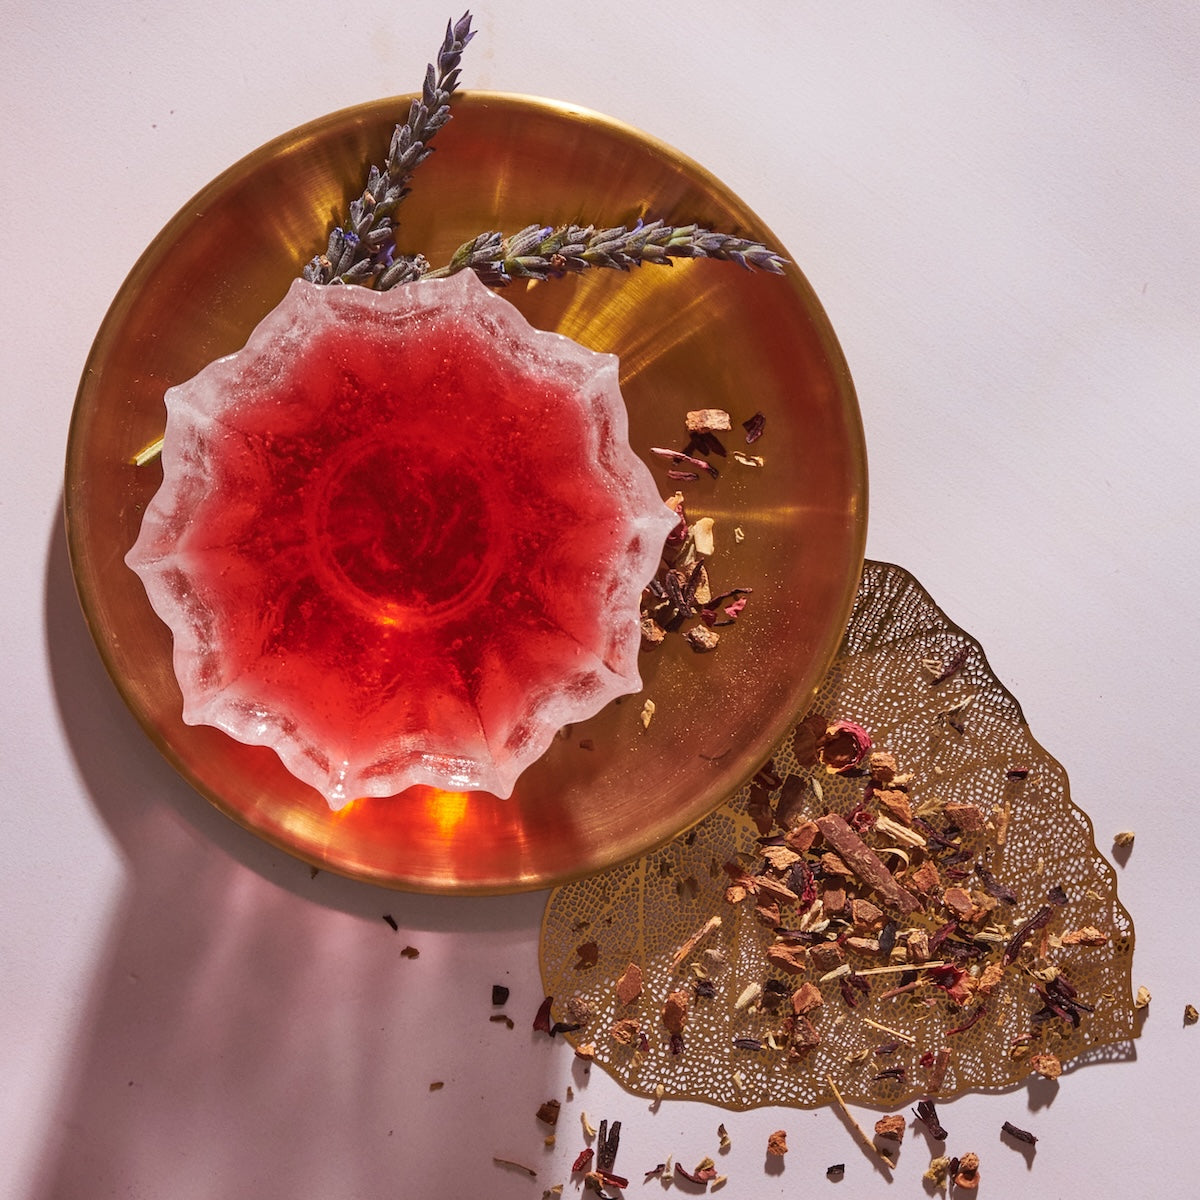 A red drink in a clear, decorative glass sits on a golden plate. The drink, infused with Magic Hour&#39;s The Lovers, is garnished with sprigs of lavender. Next to the plate are scattered pieces of dried herbs and a gold, lace-like leaf. The background is a light, neutral color.